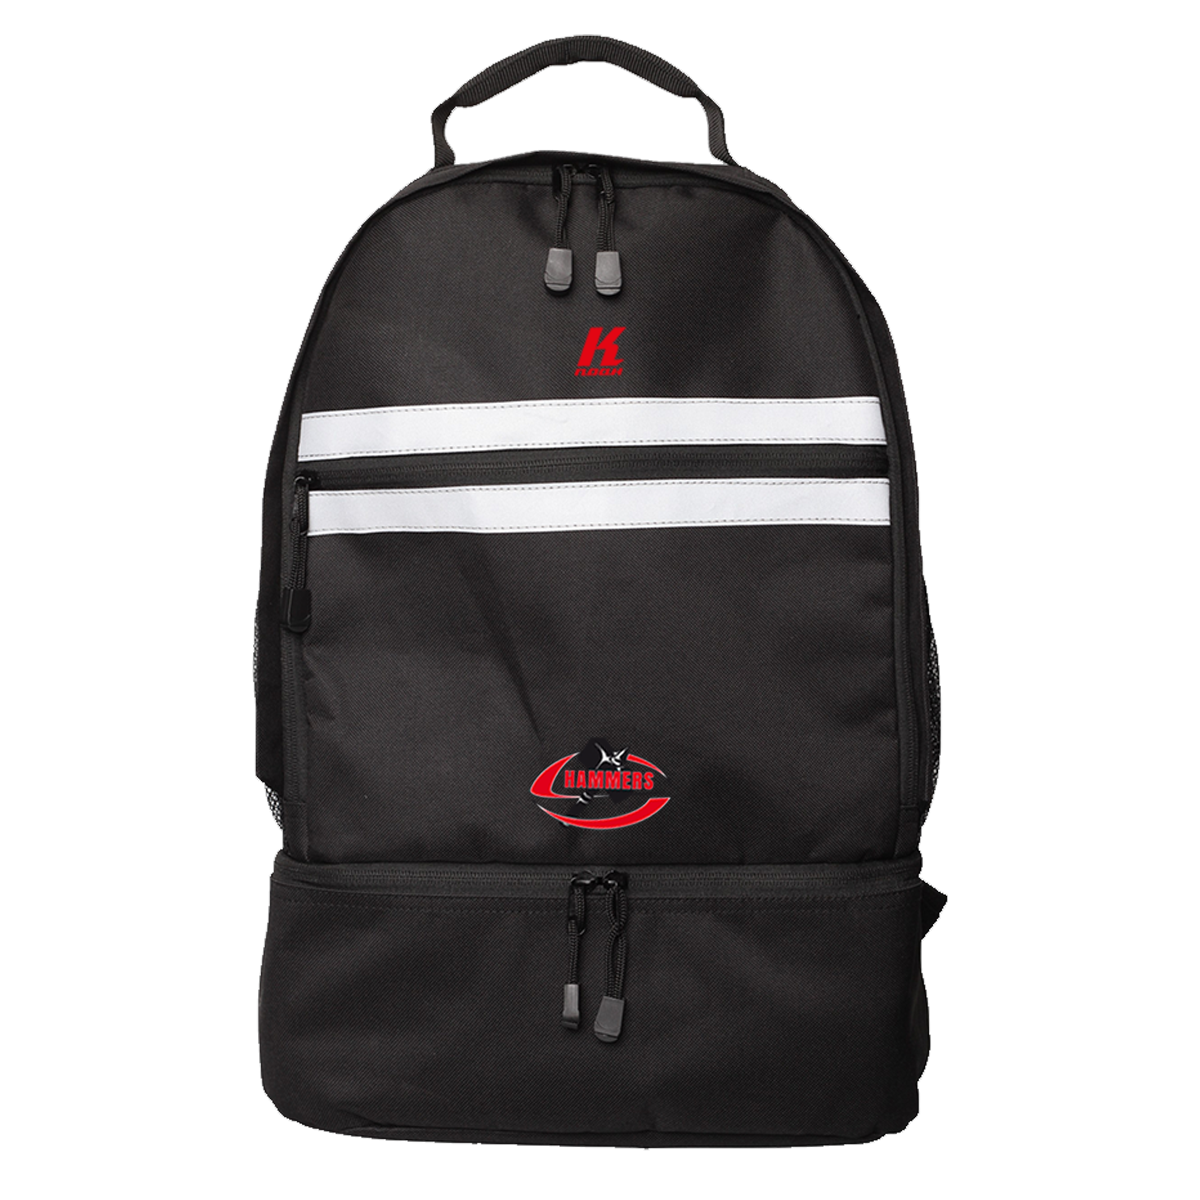 S-Hammers Players Backpack